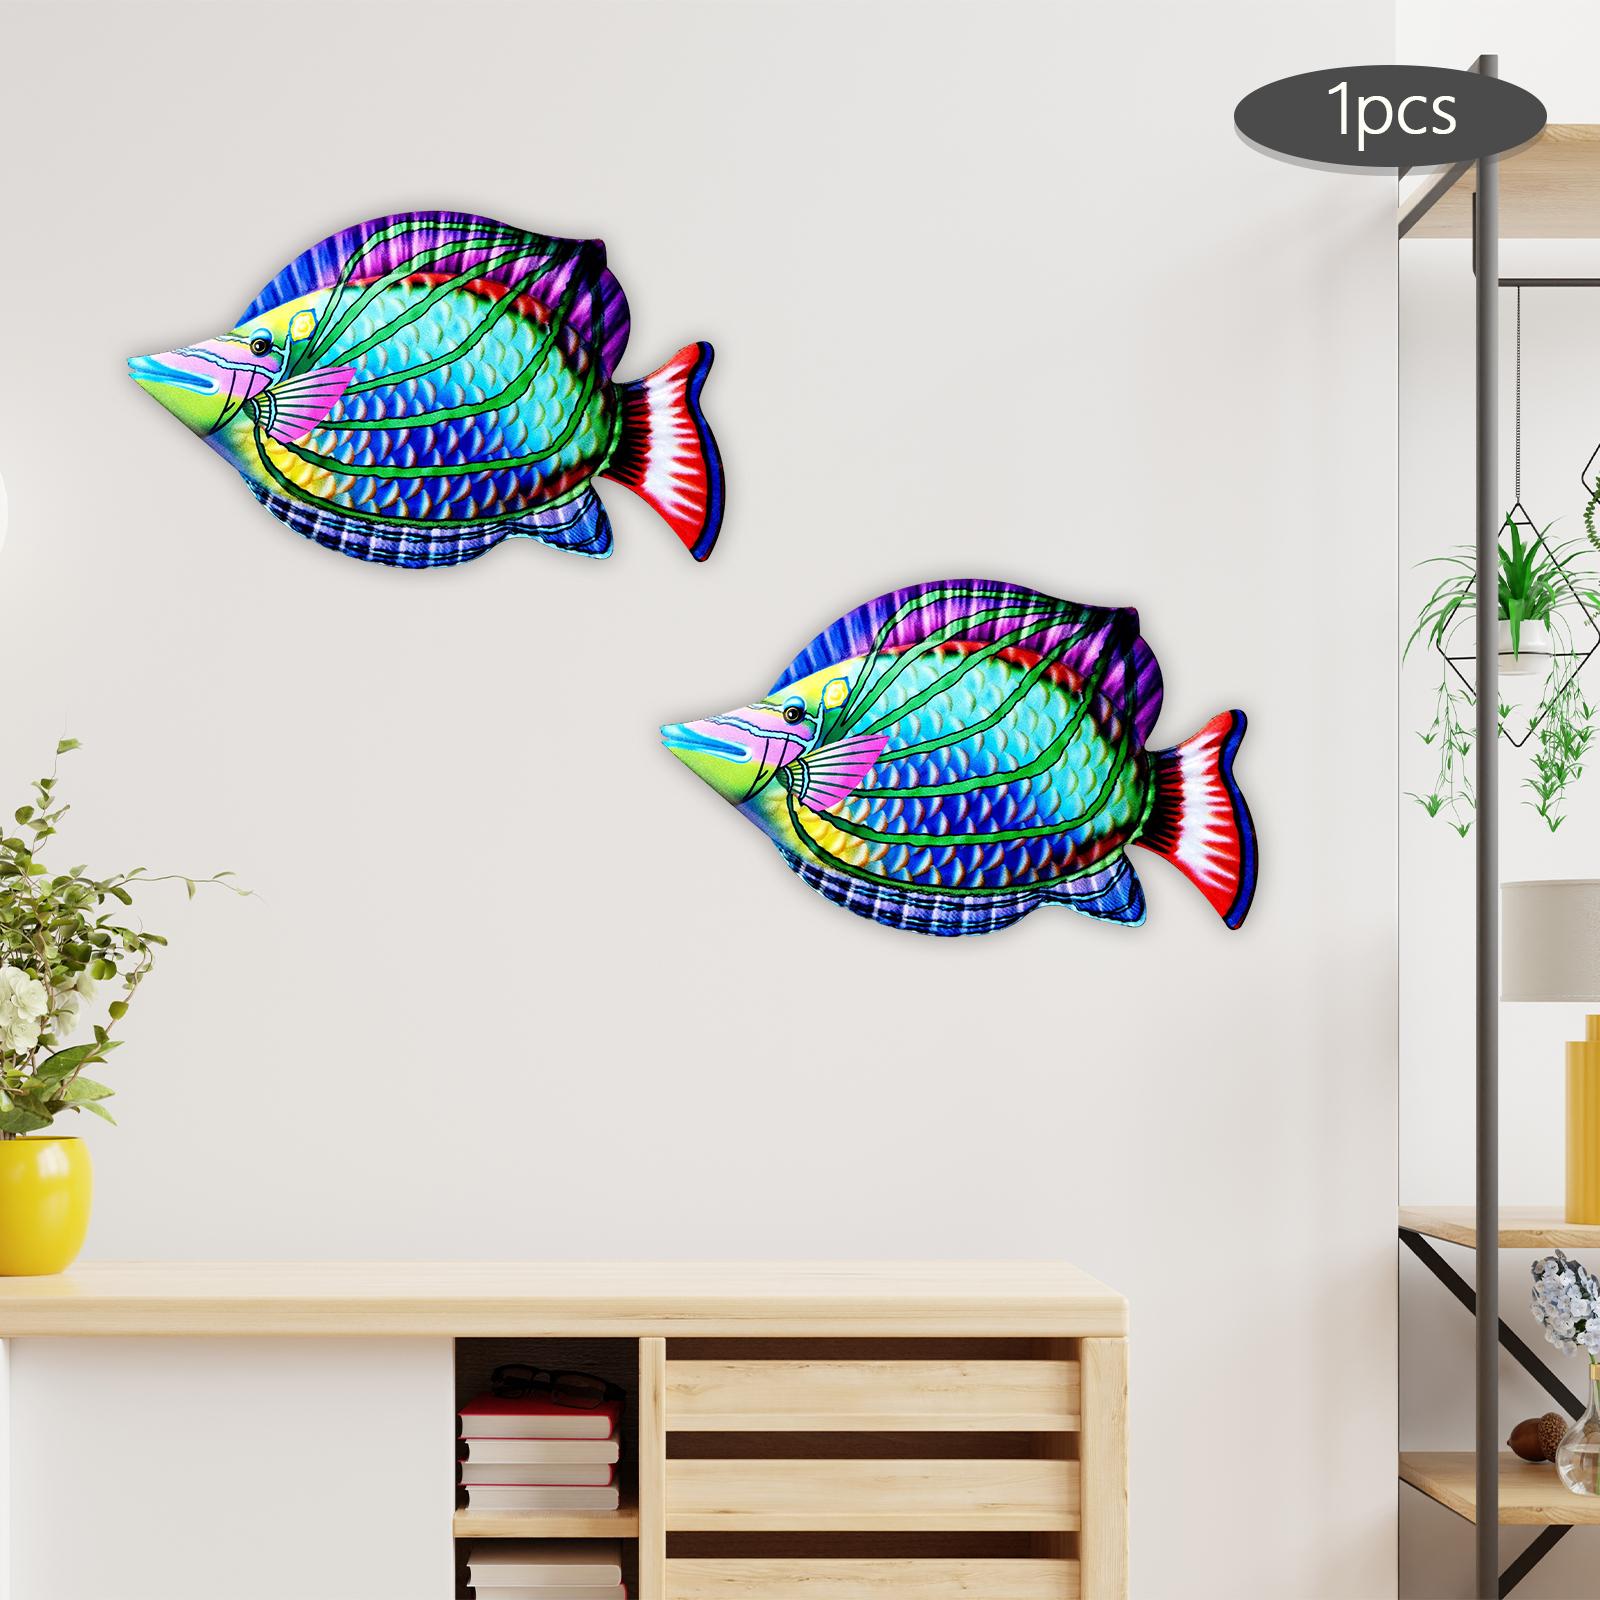 fish Decor Statue Wall Decoration for Bathroom Balcony Office Violet